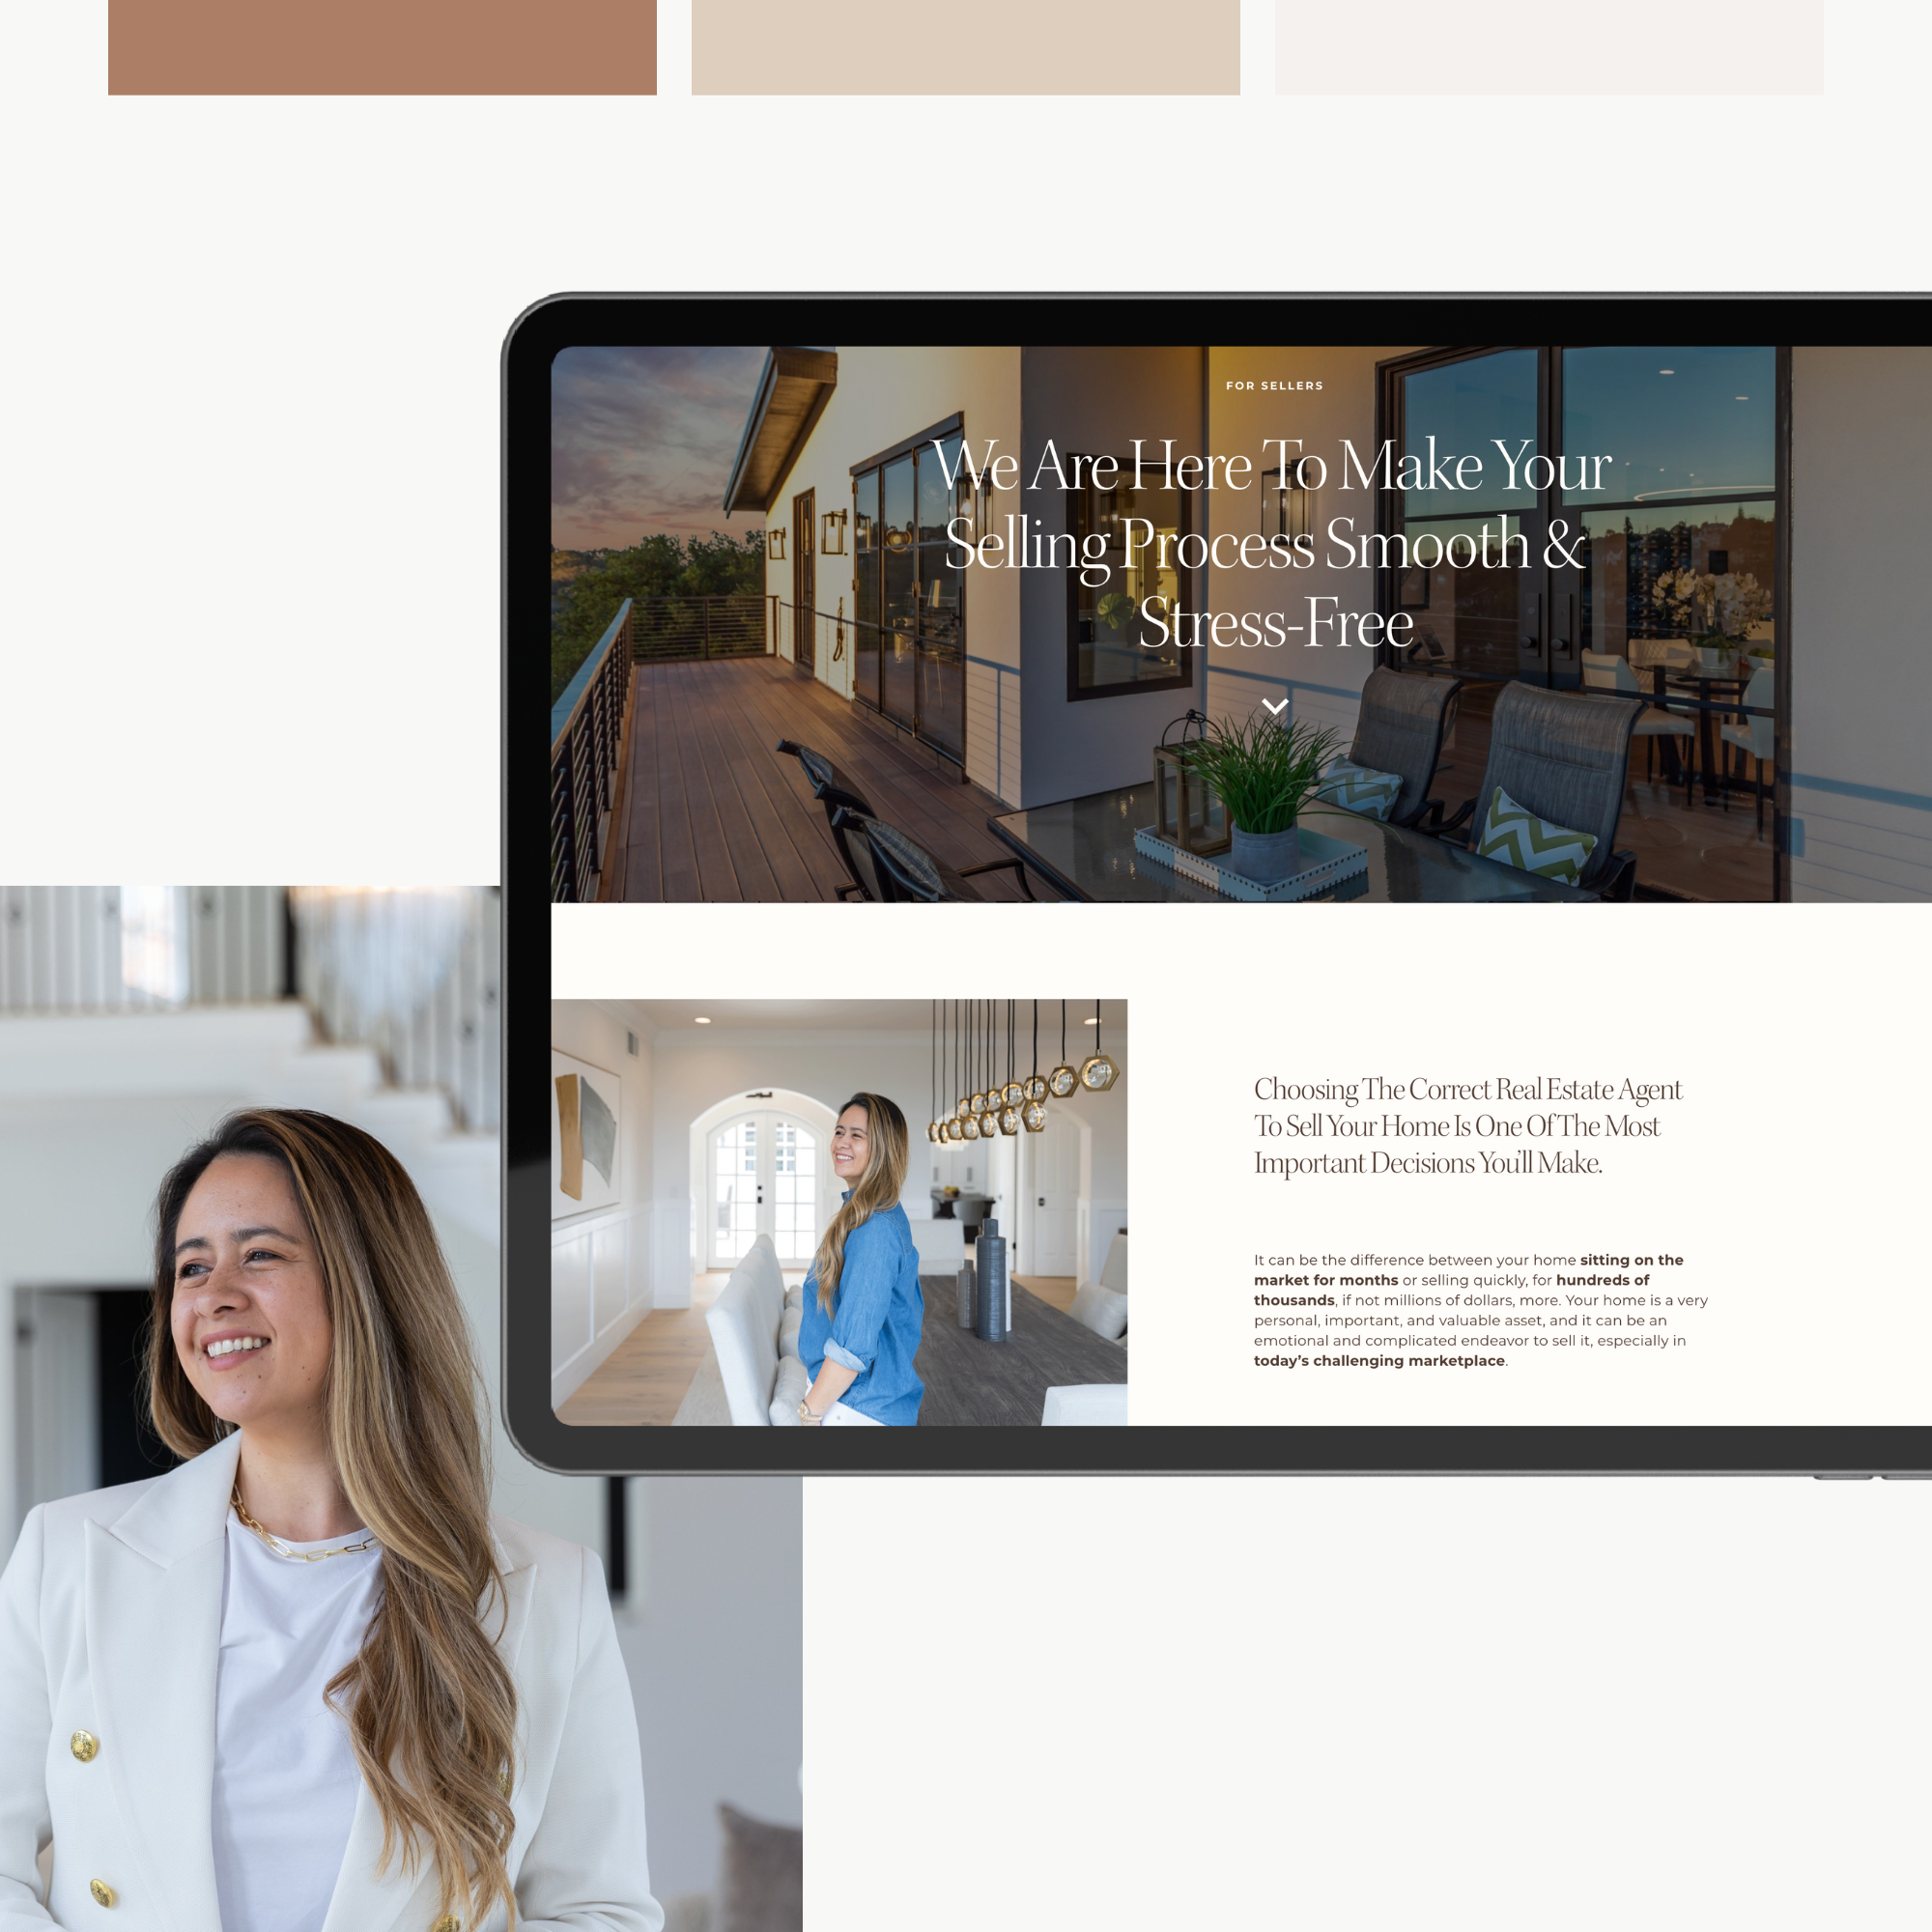 Custom-Squarespace-website-Design-for-Luxury-real-estate-agent-43.png